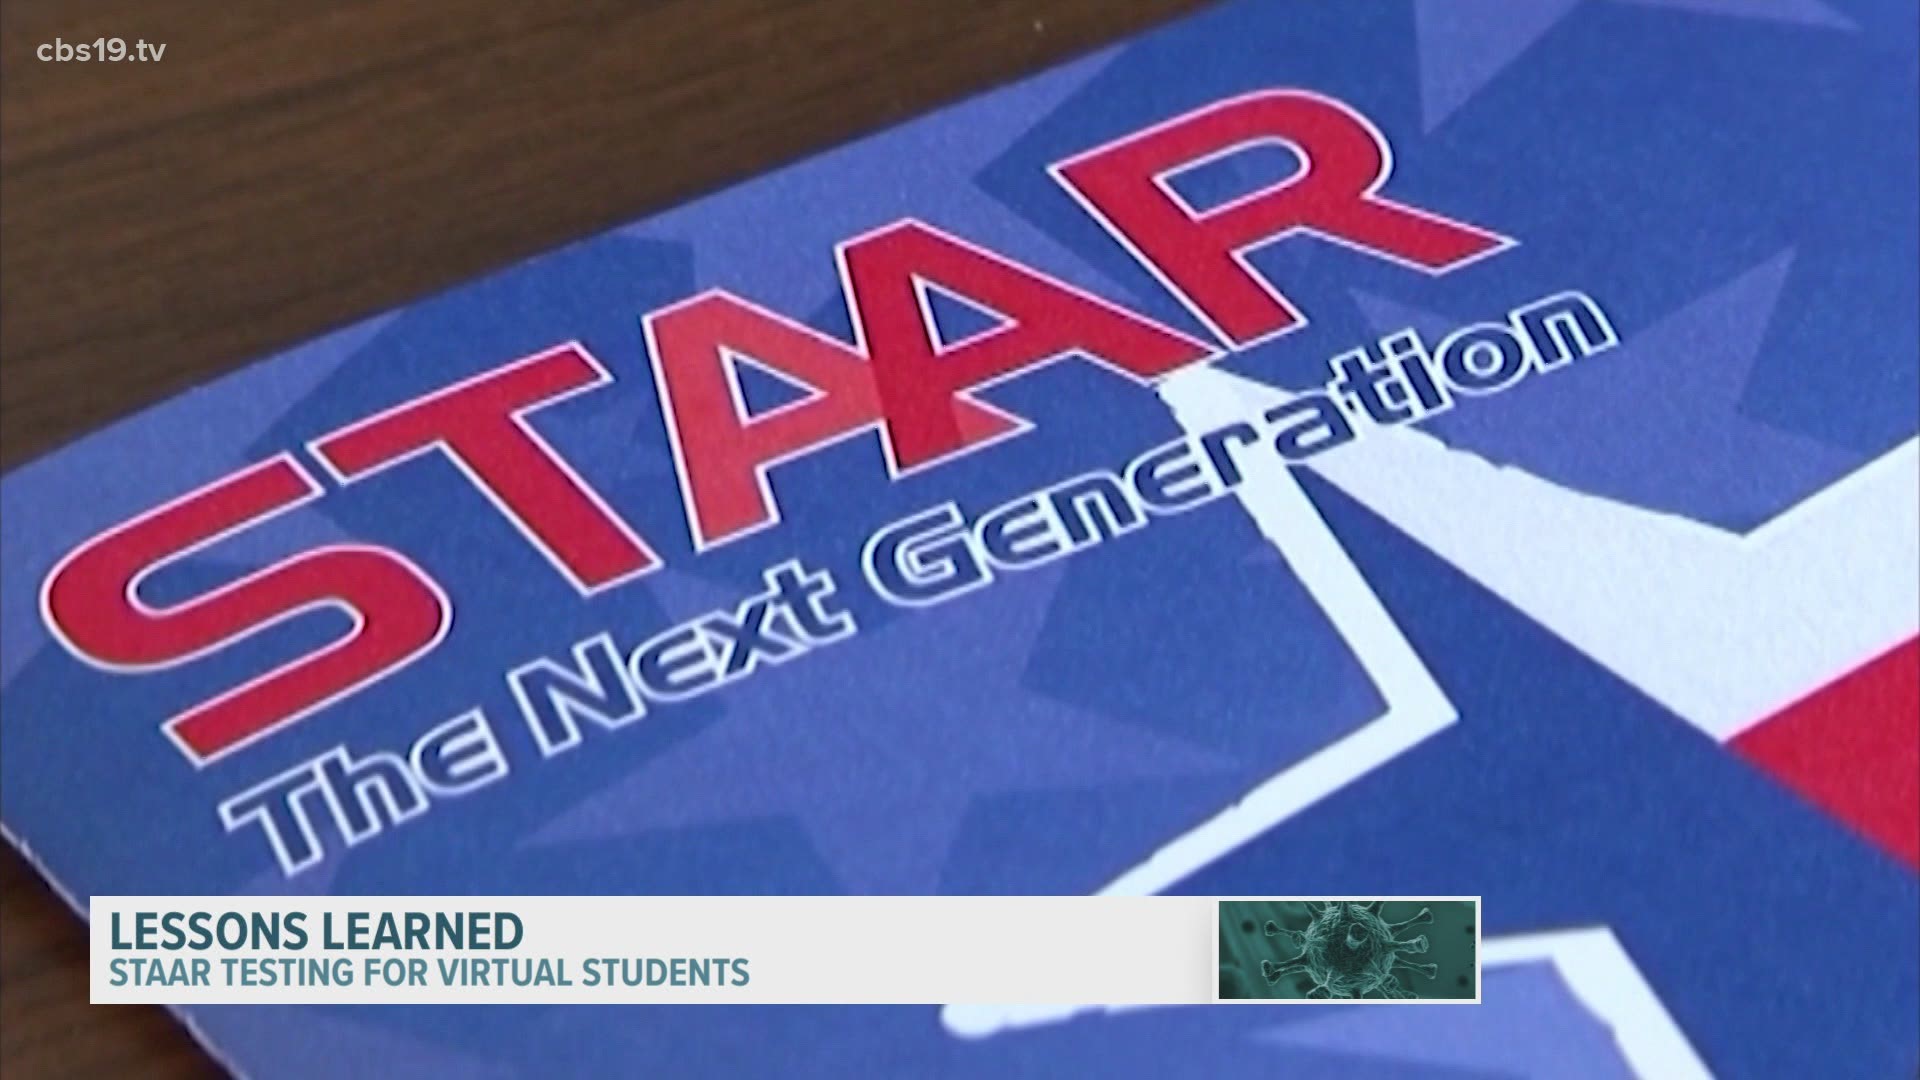 After canceling the STAAR test in Spring 2020, the TEA plans to resume testing, even for remote learners. East Texas schools are planning for a safe environment.